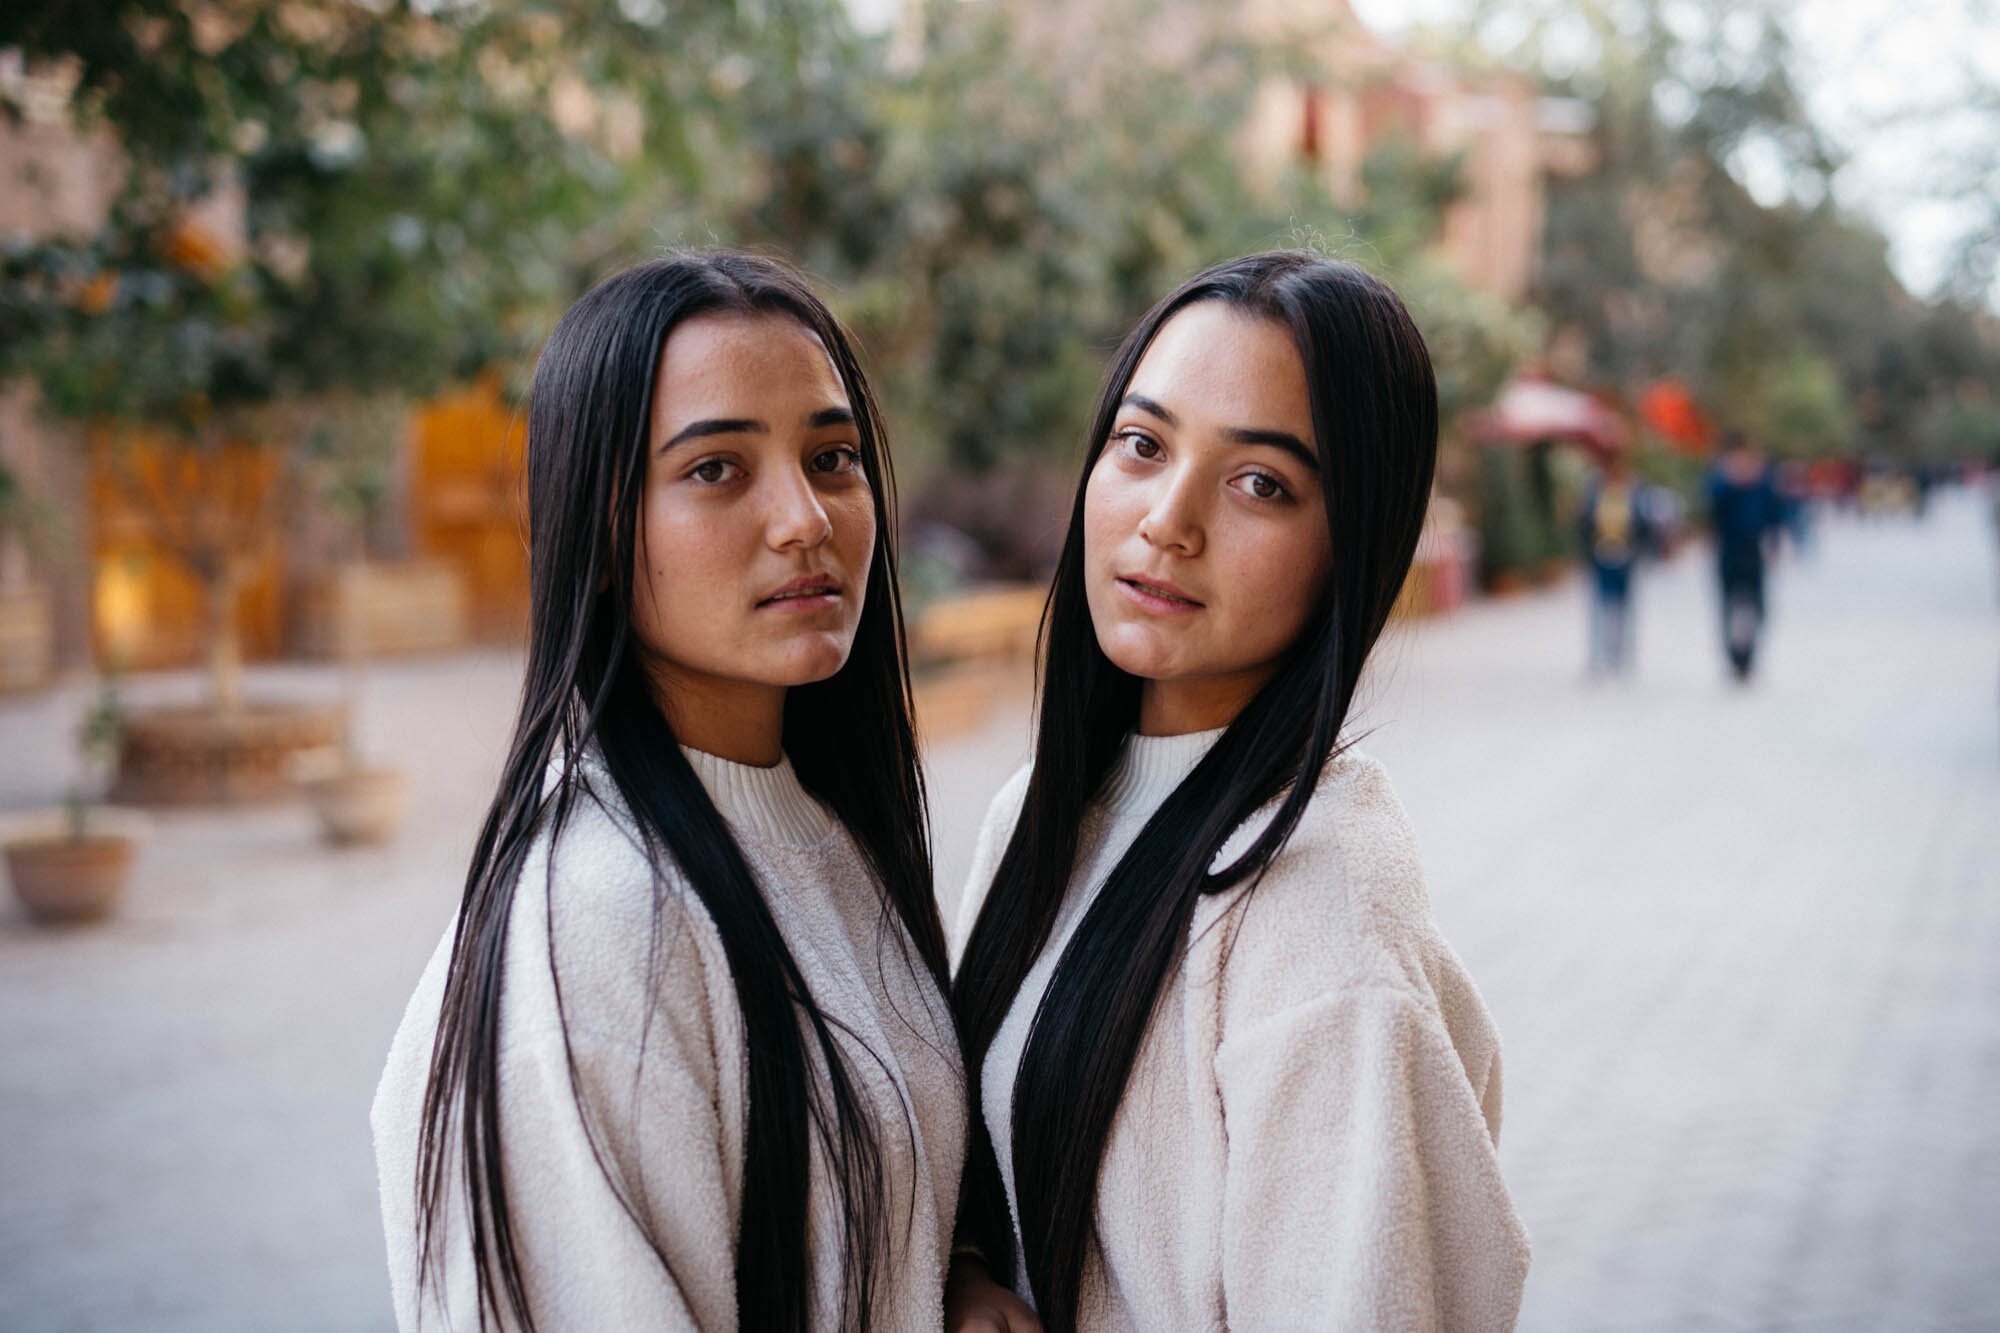  Two young women wearing identical clothes - are they twins? 